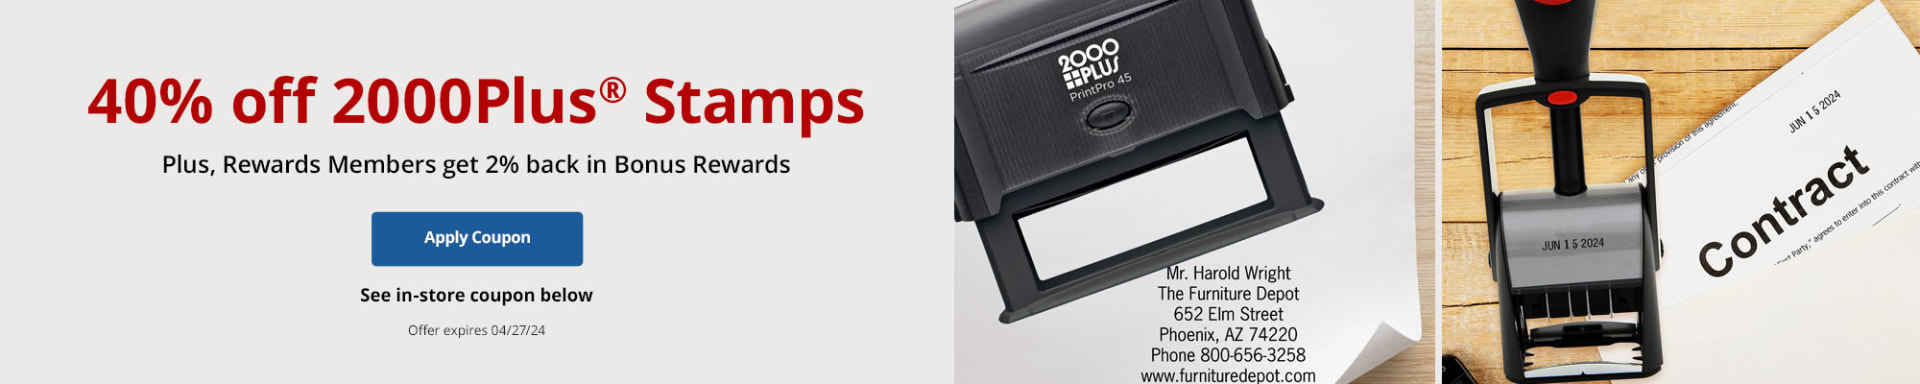 40% off 2000Plus Stamps